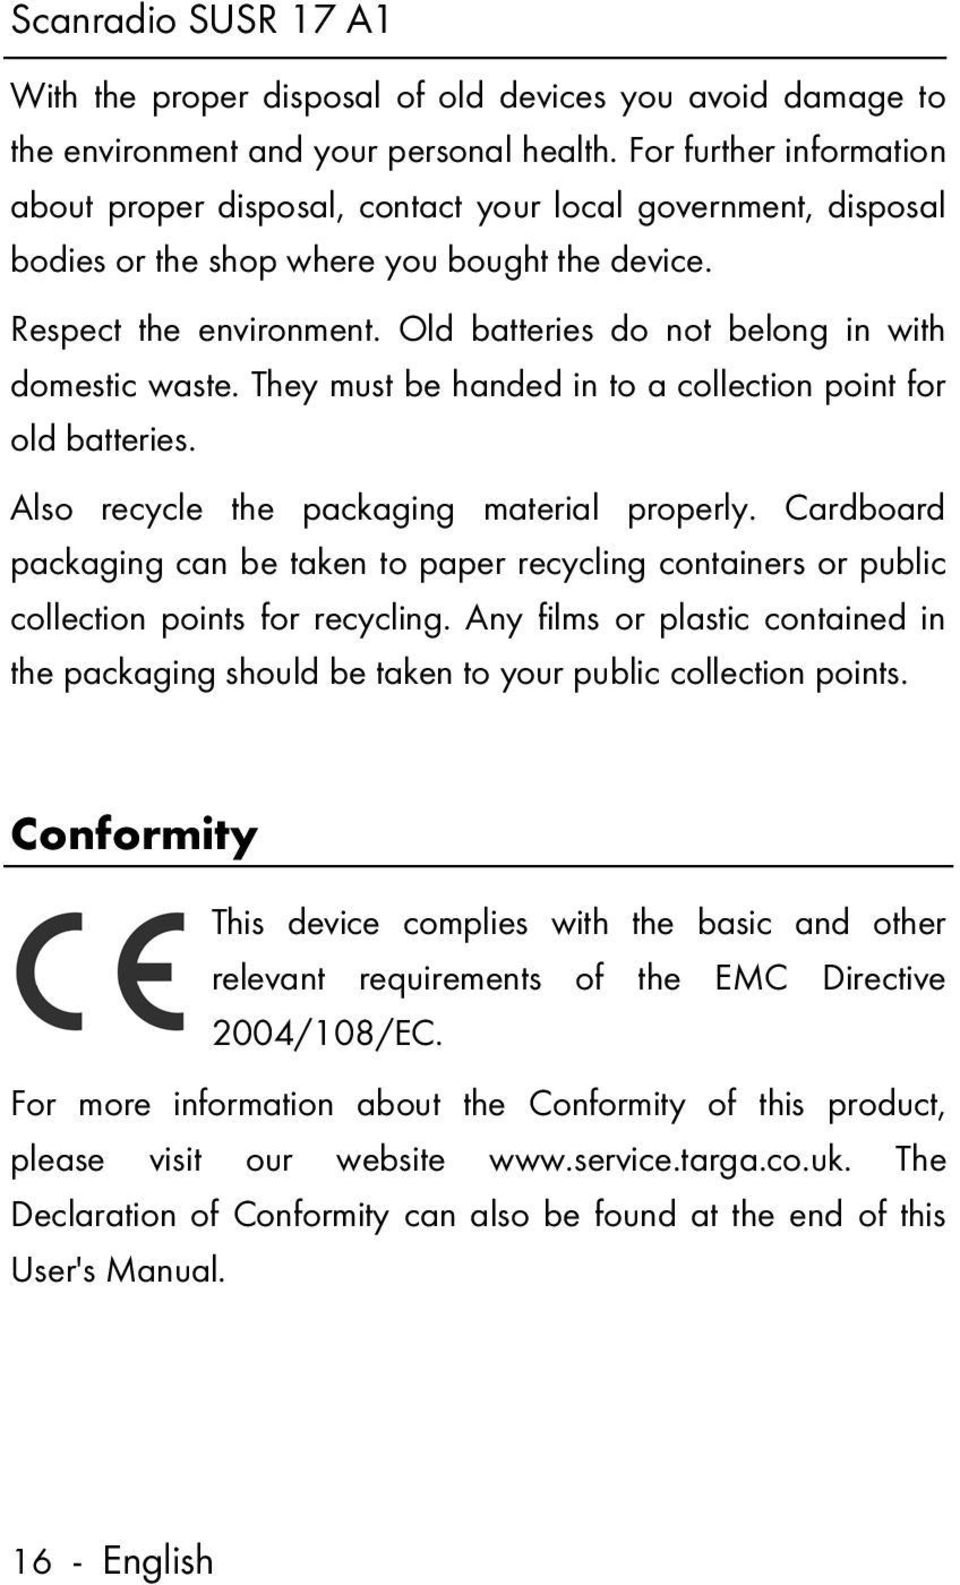 Old batteries do not belong in with domestic waste. They must be handed in to a collection point for old batteries. Also recycle the packaging material properly.